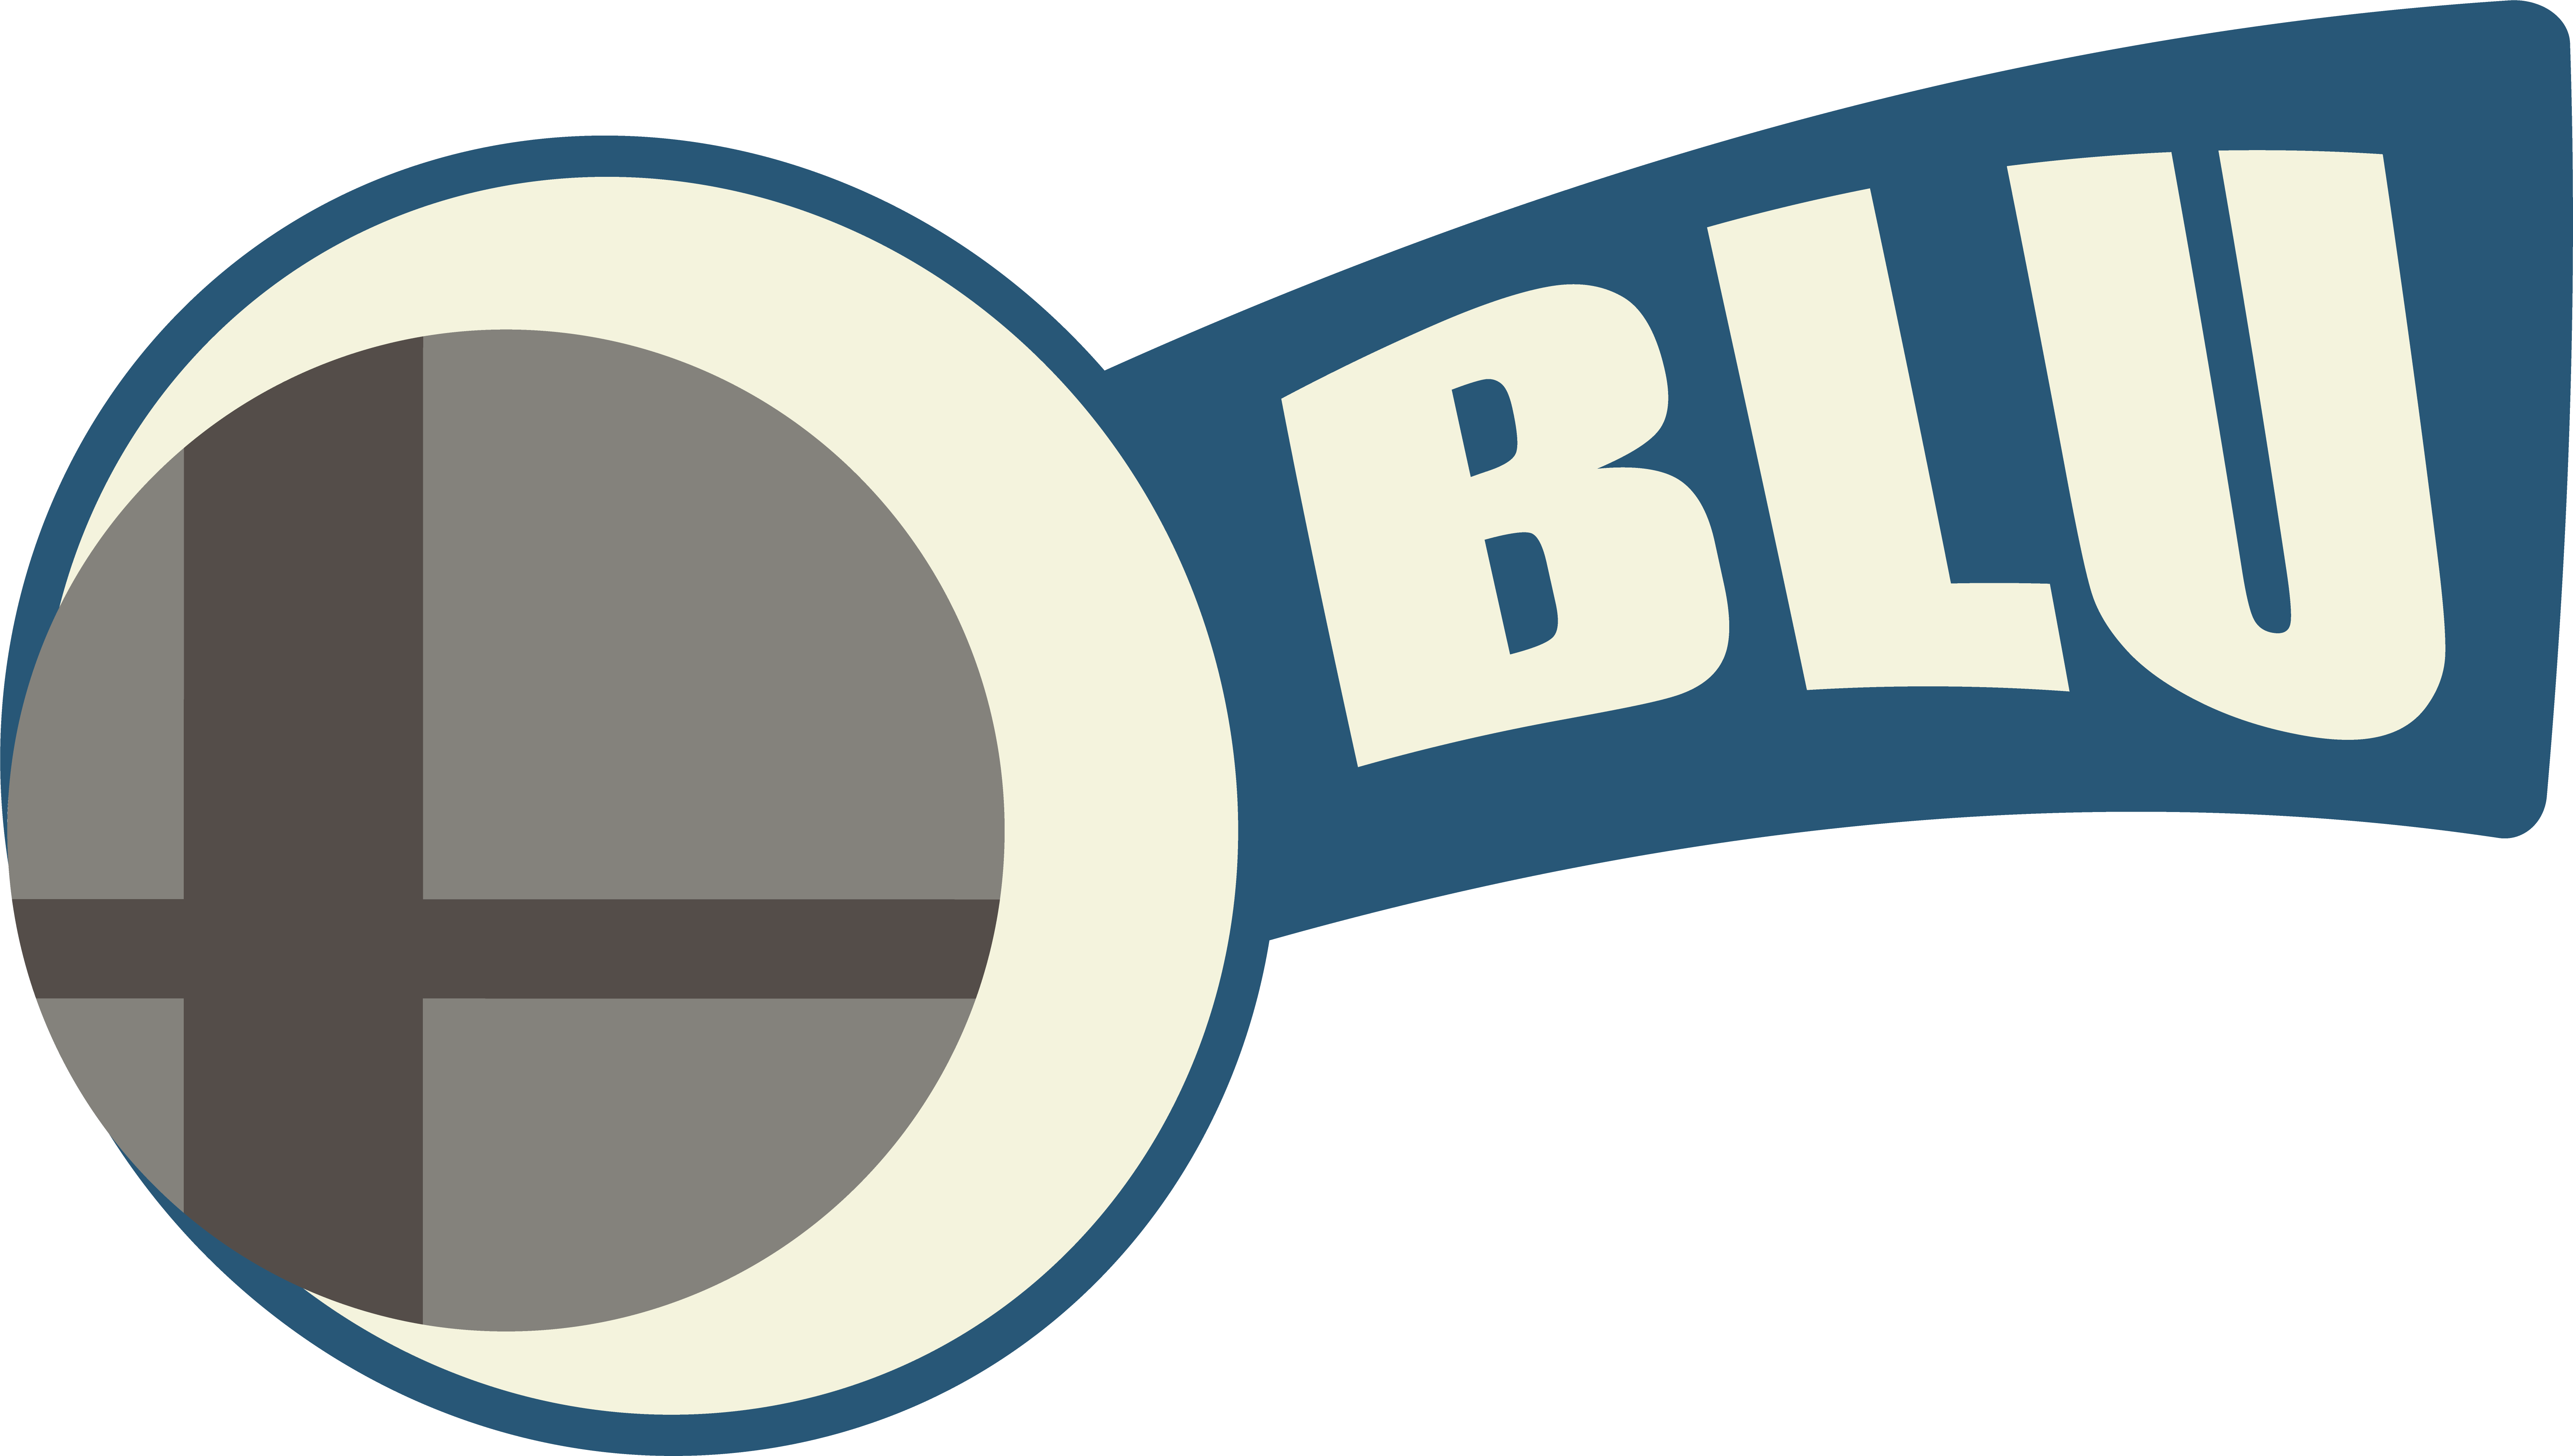 A Logo Of A Grey Circle With A White Circle And A Blue Banner